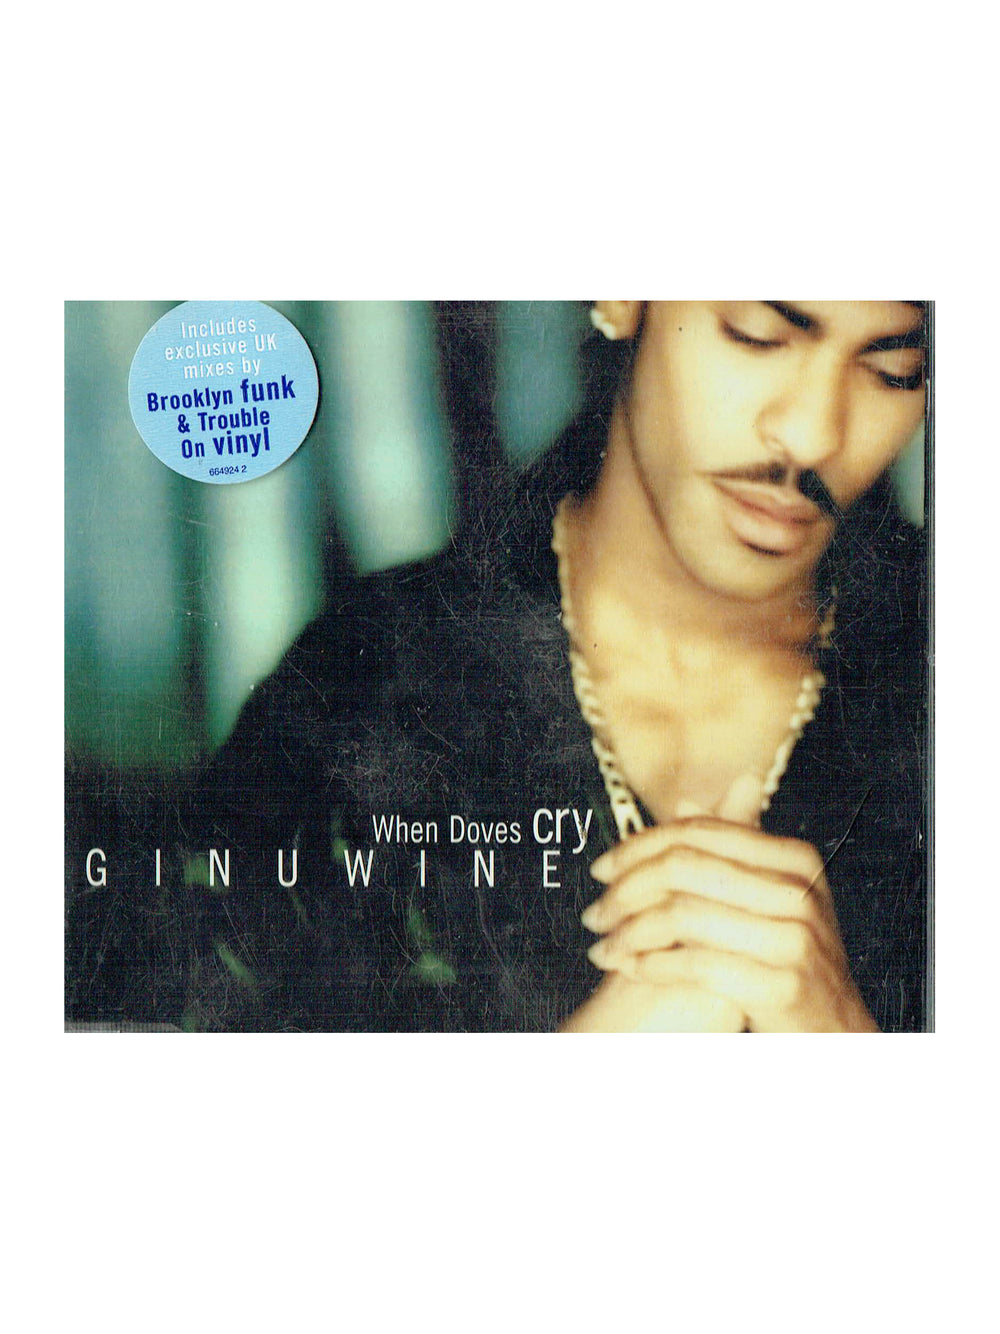 Prince – Ginuwine When Doves Cry CD Maxi Single UK Preloved:1997